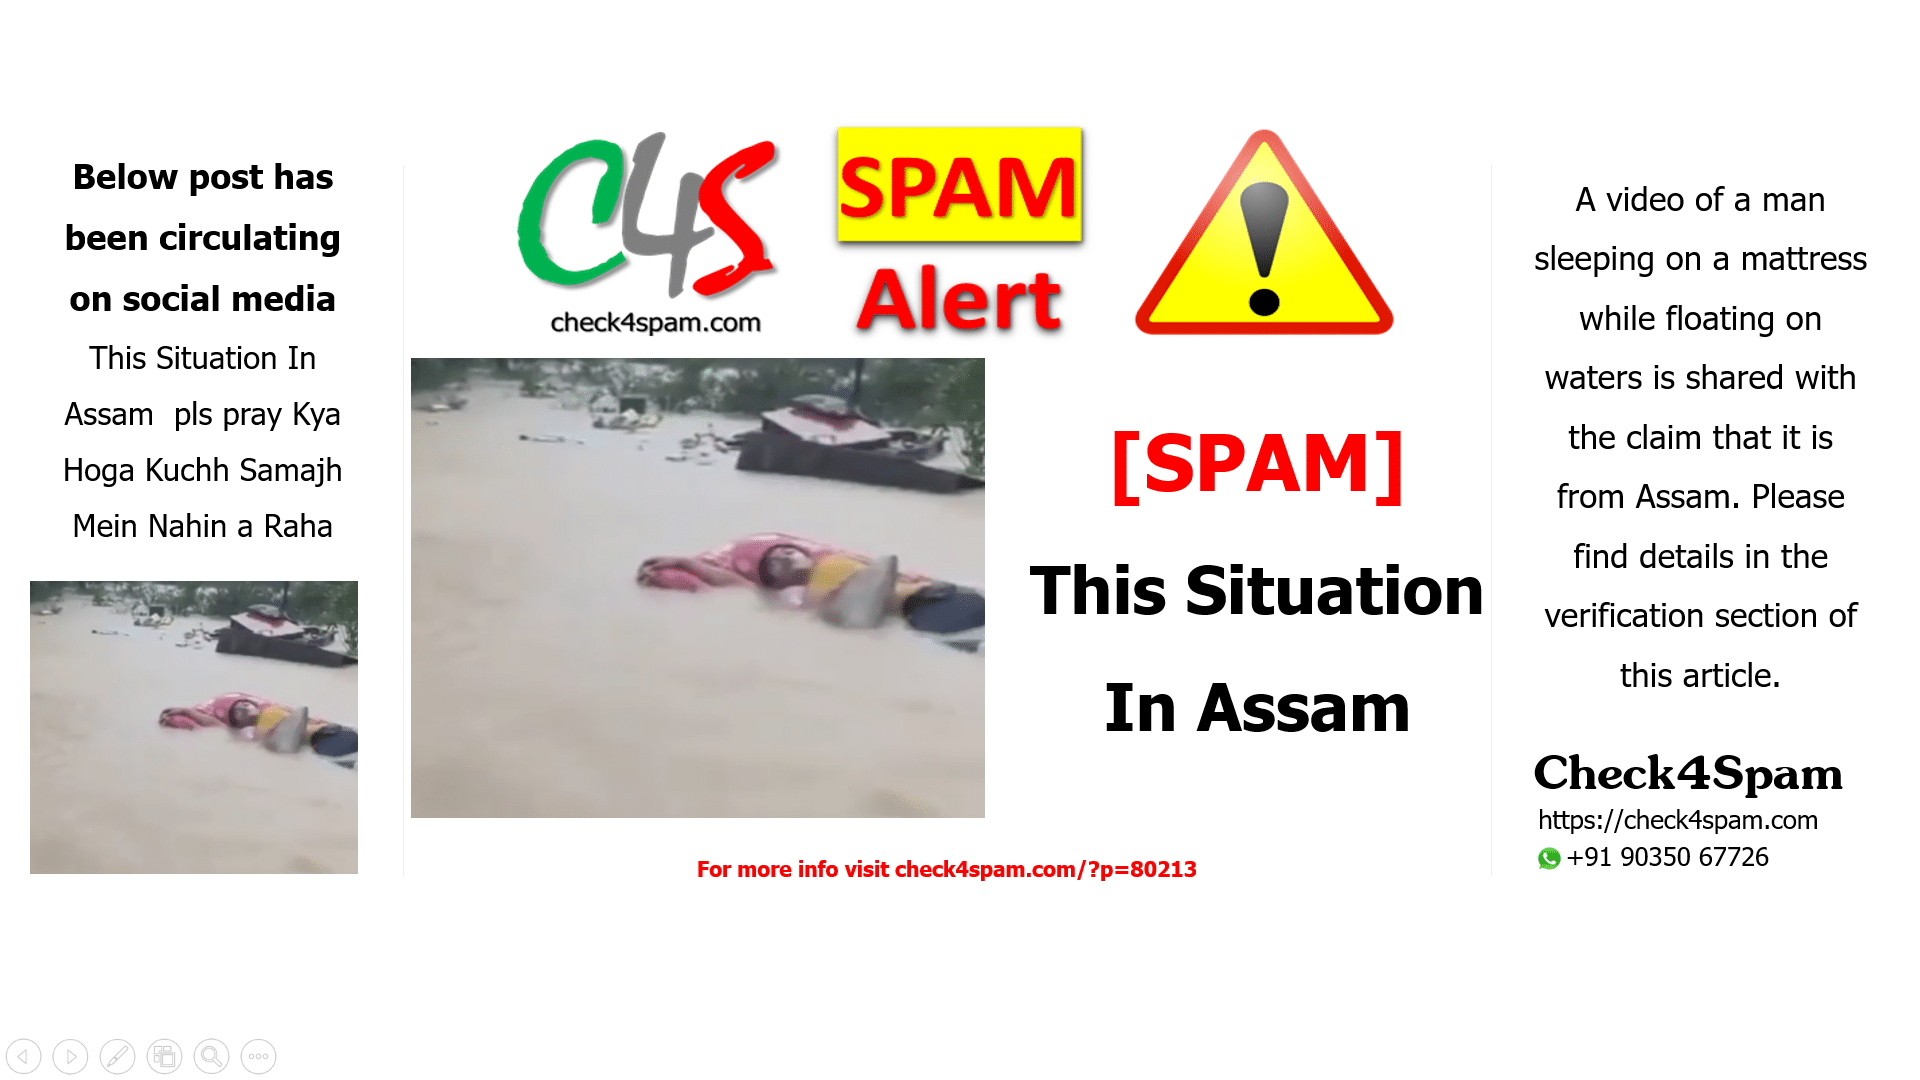 This Situation In Assam